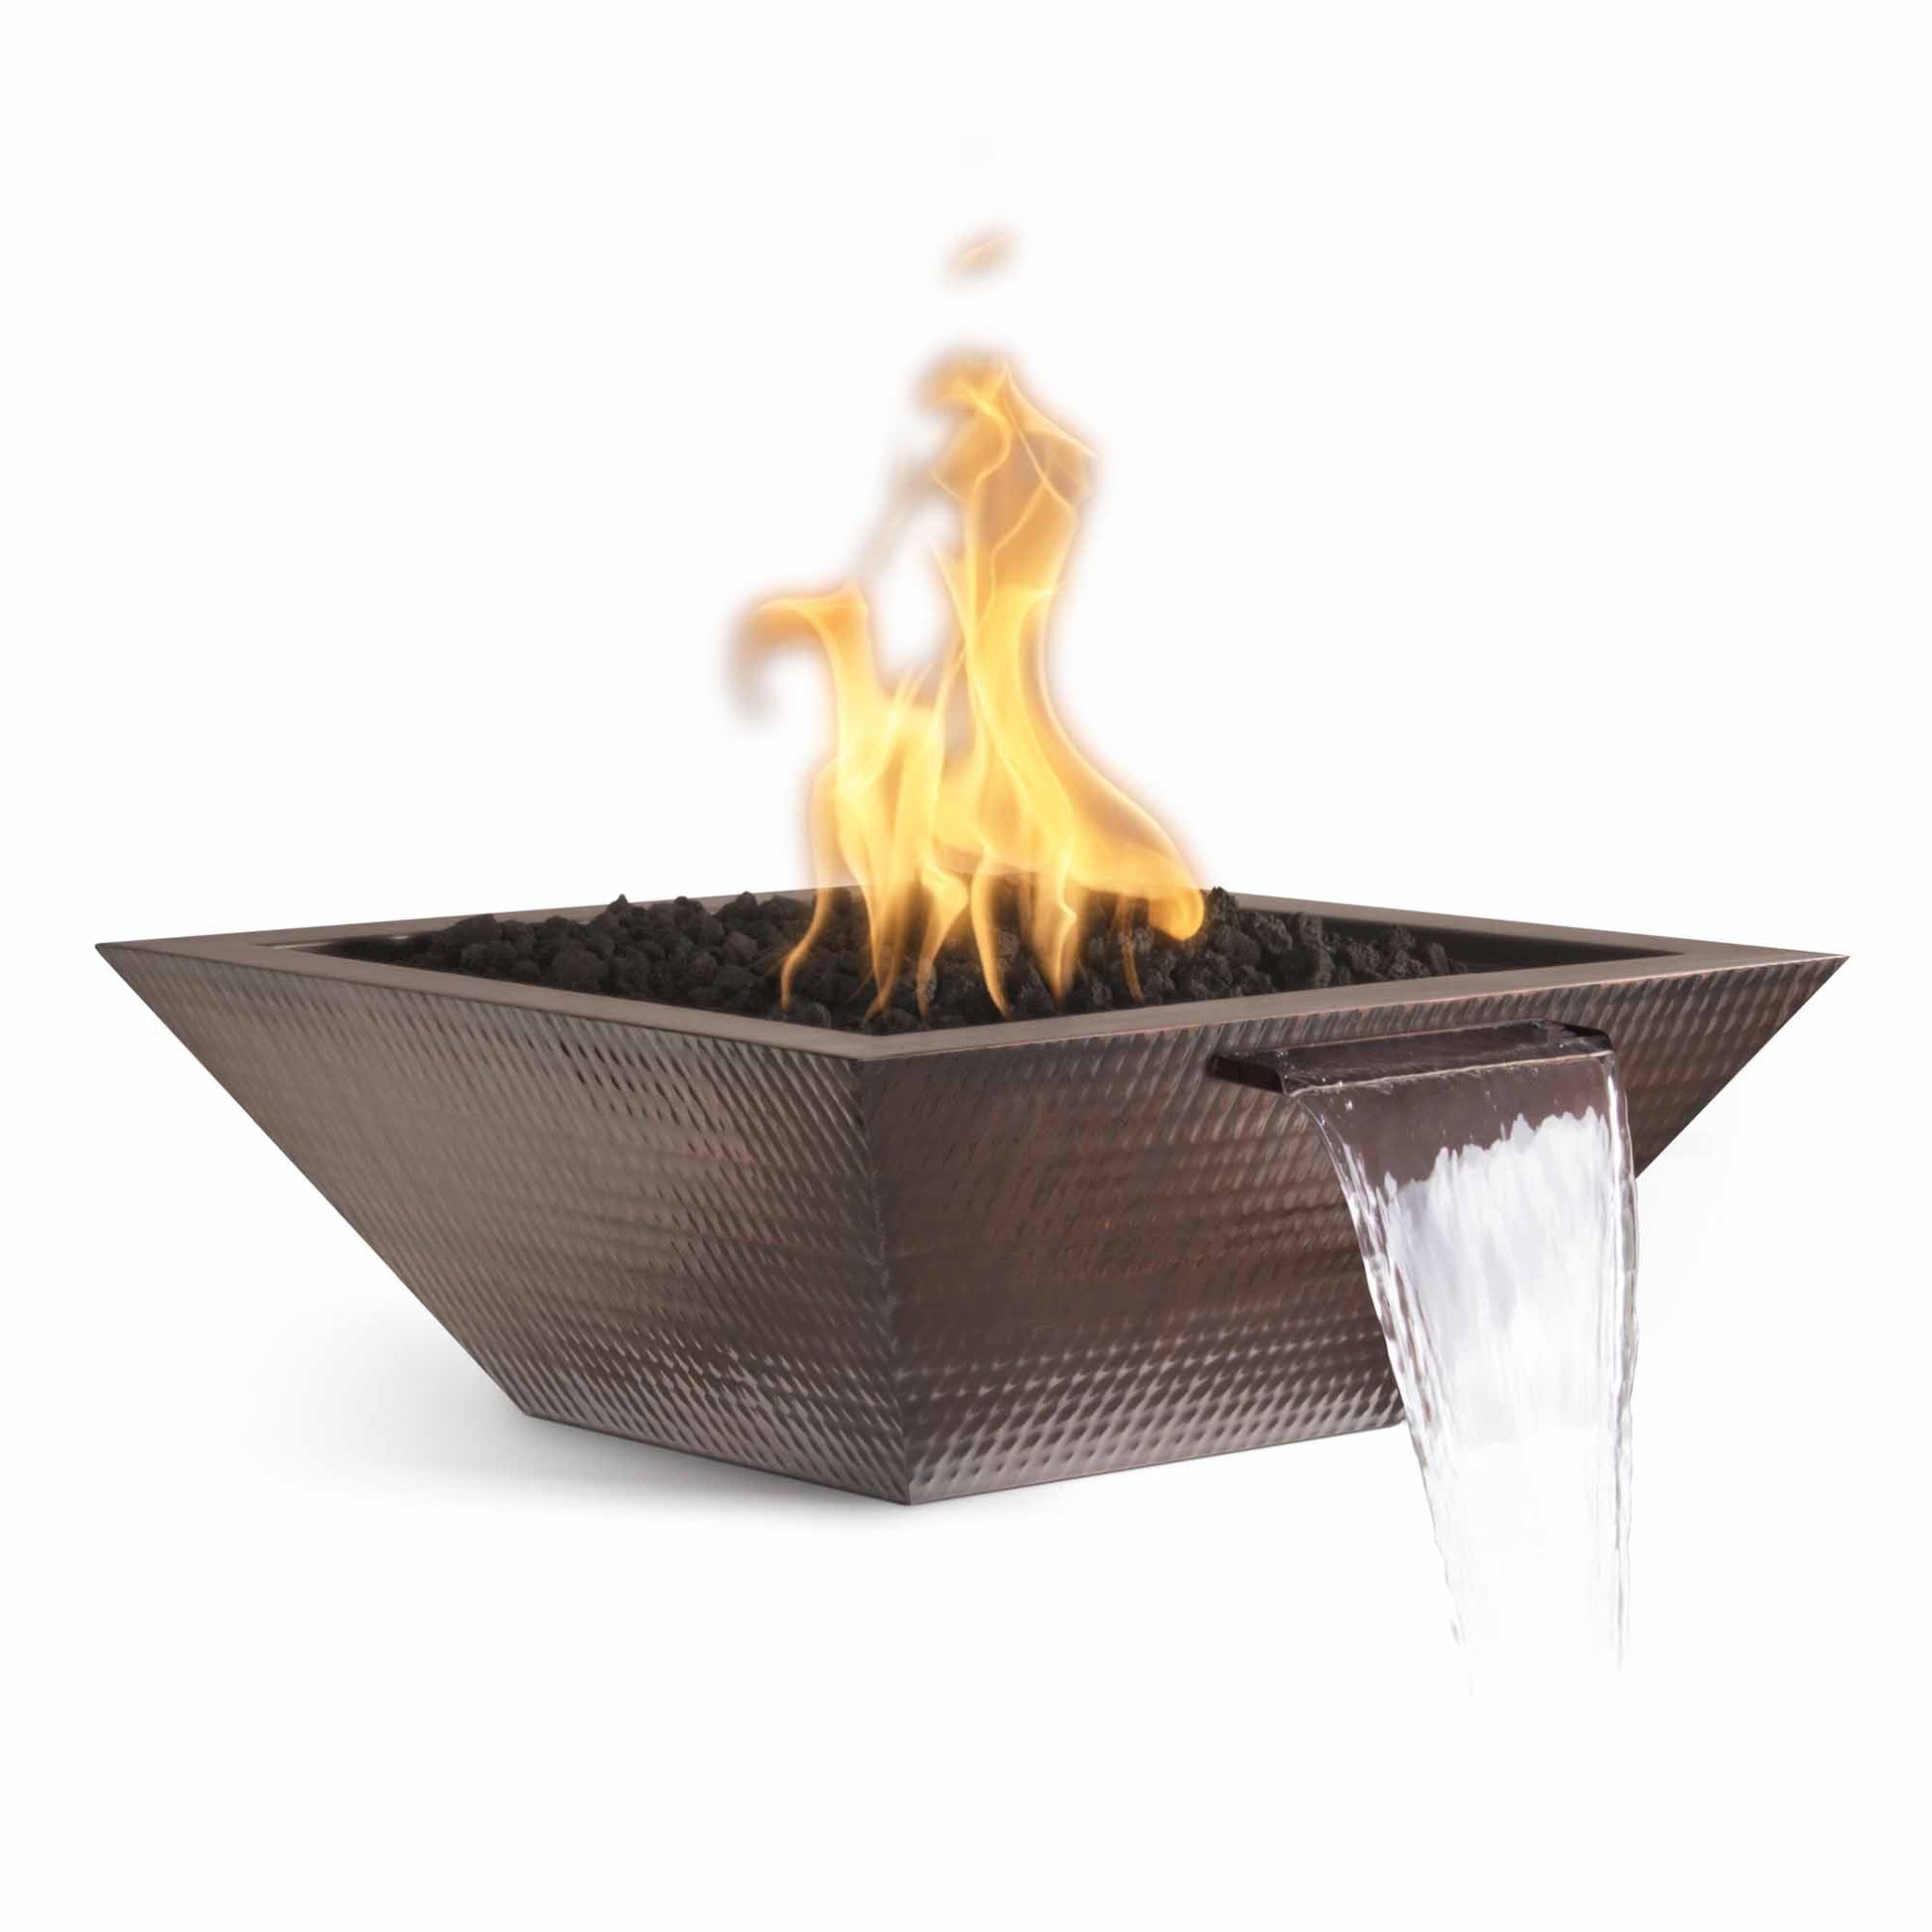 The Outdoor Plus Square Maya 30" Copper Natural Gas Fire & Water Bowl with Match Lit with Flame Sense Ignition